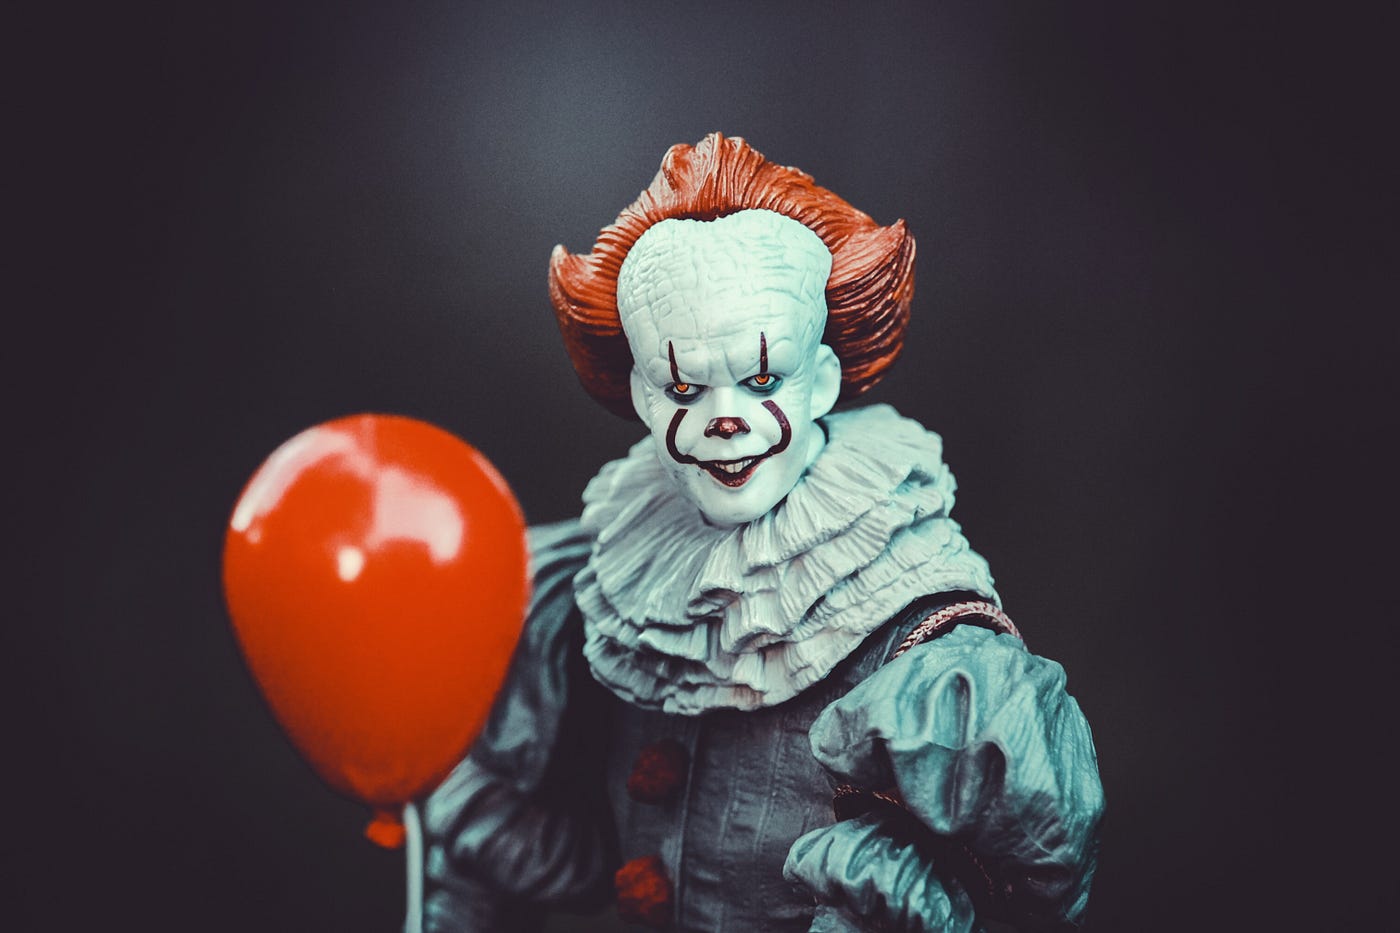 Pennywise, the dancing clown with his red balloon, is a classic pop culture horror icon, representing one of our most common fears.